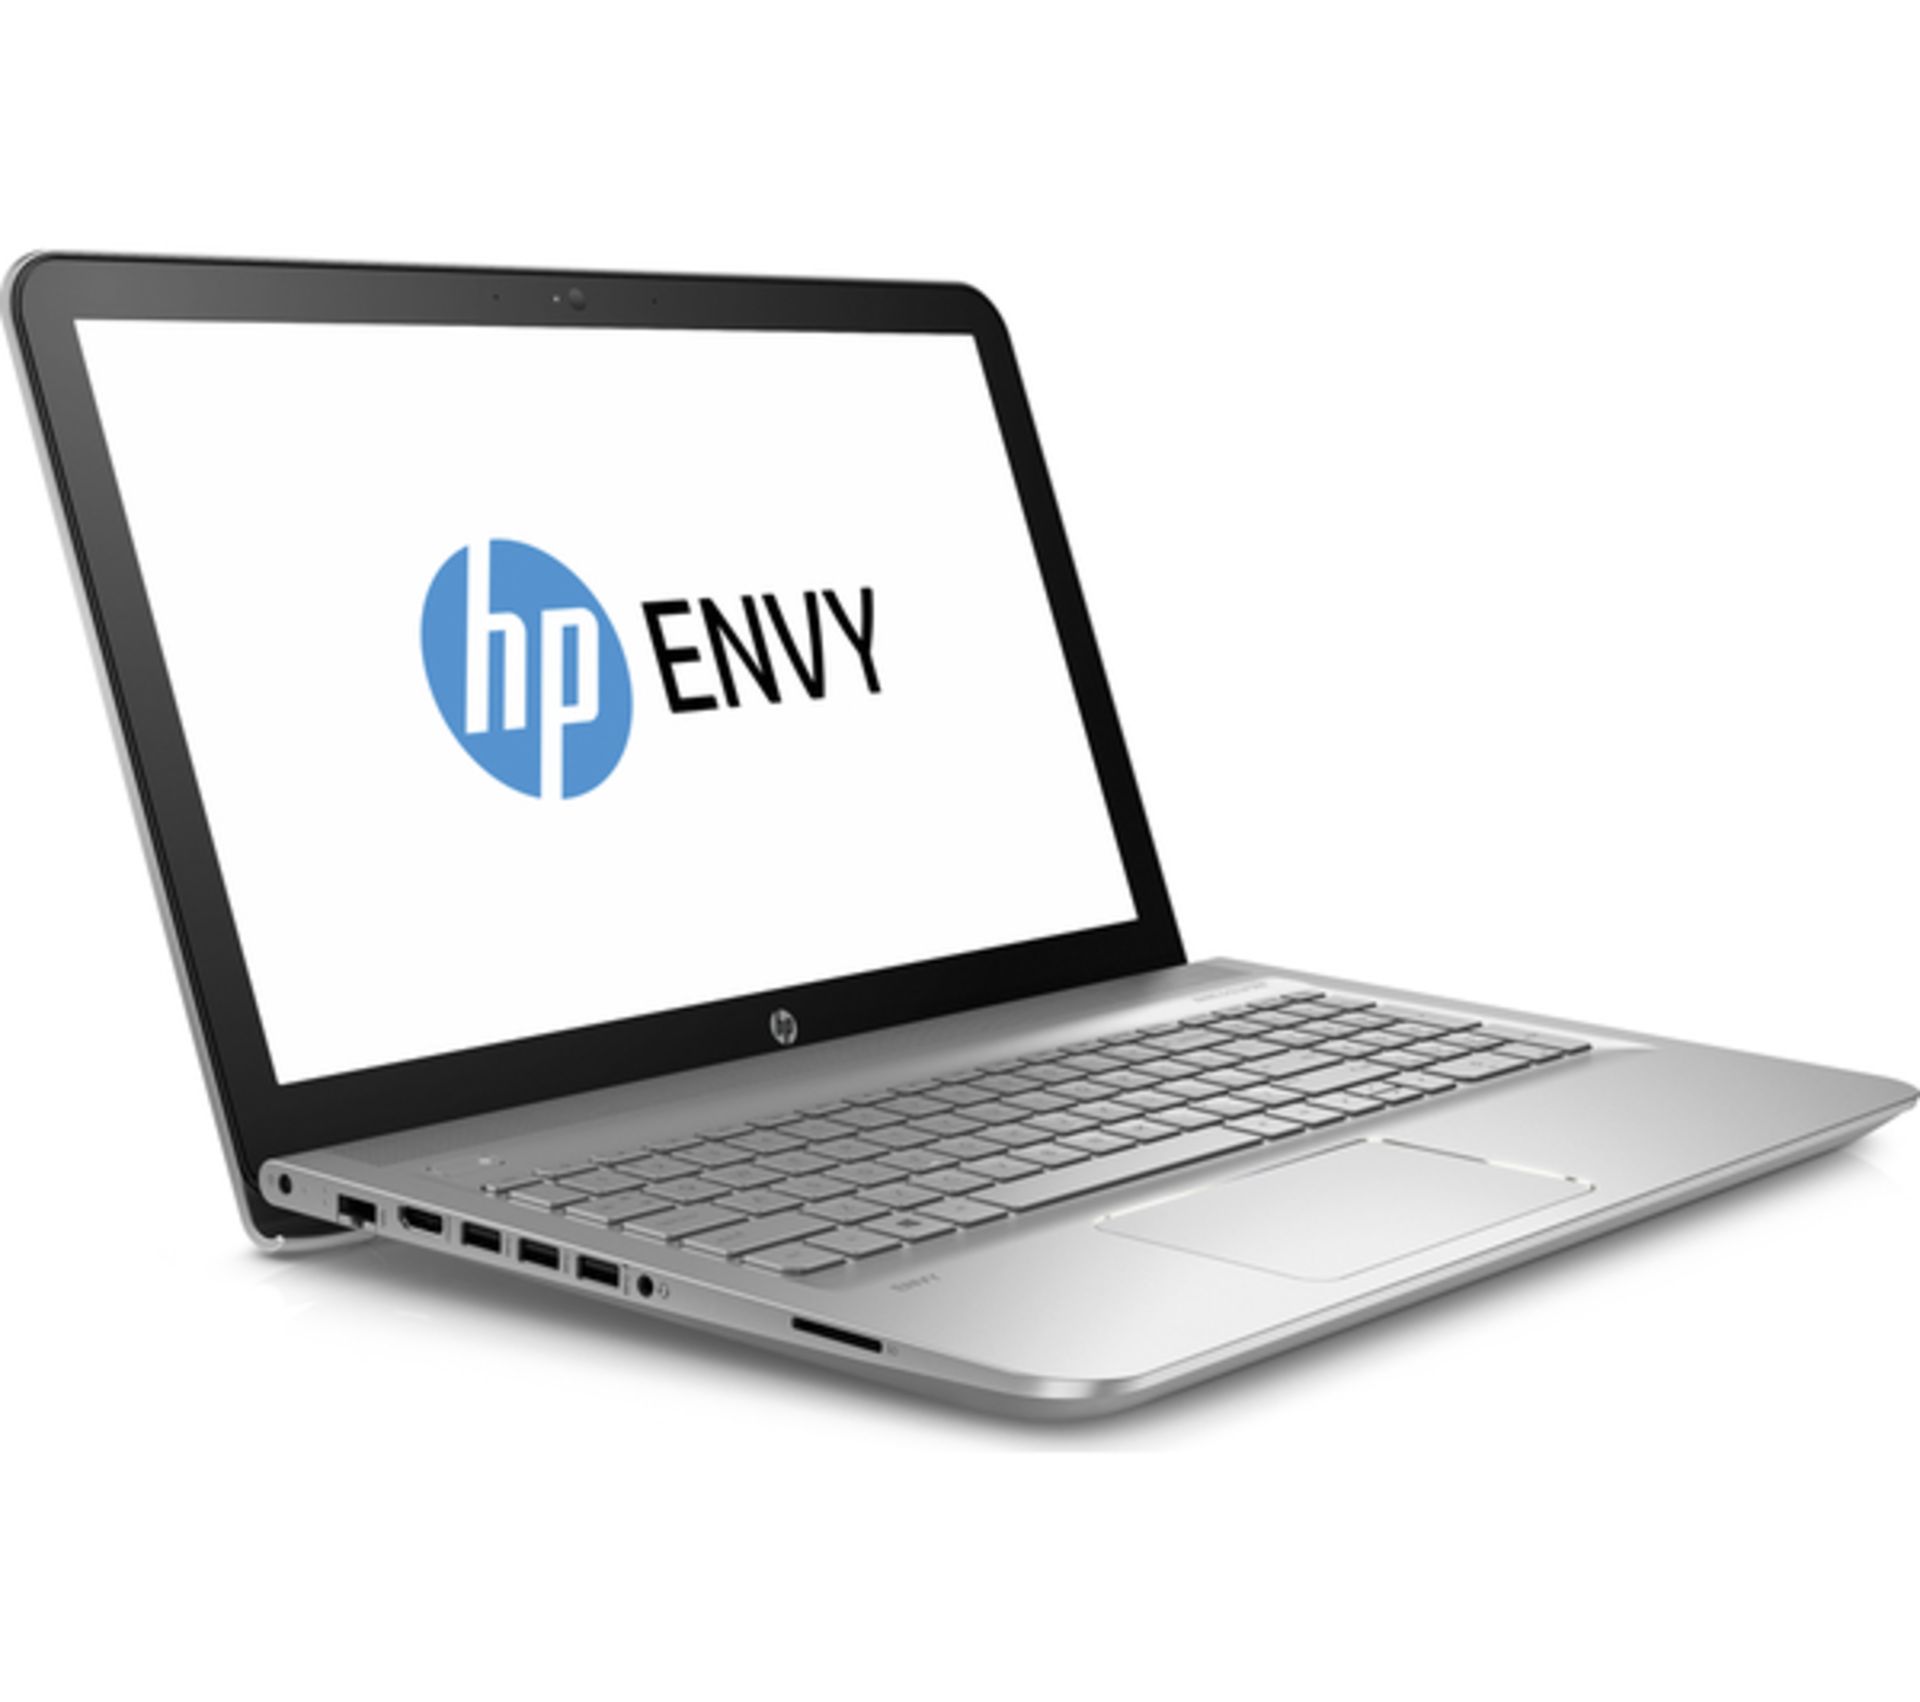 V Grade A HP Envy 15.6" Laptop With Bang & Olufsen Audio With Subwoofer - Quad Core AMD